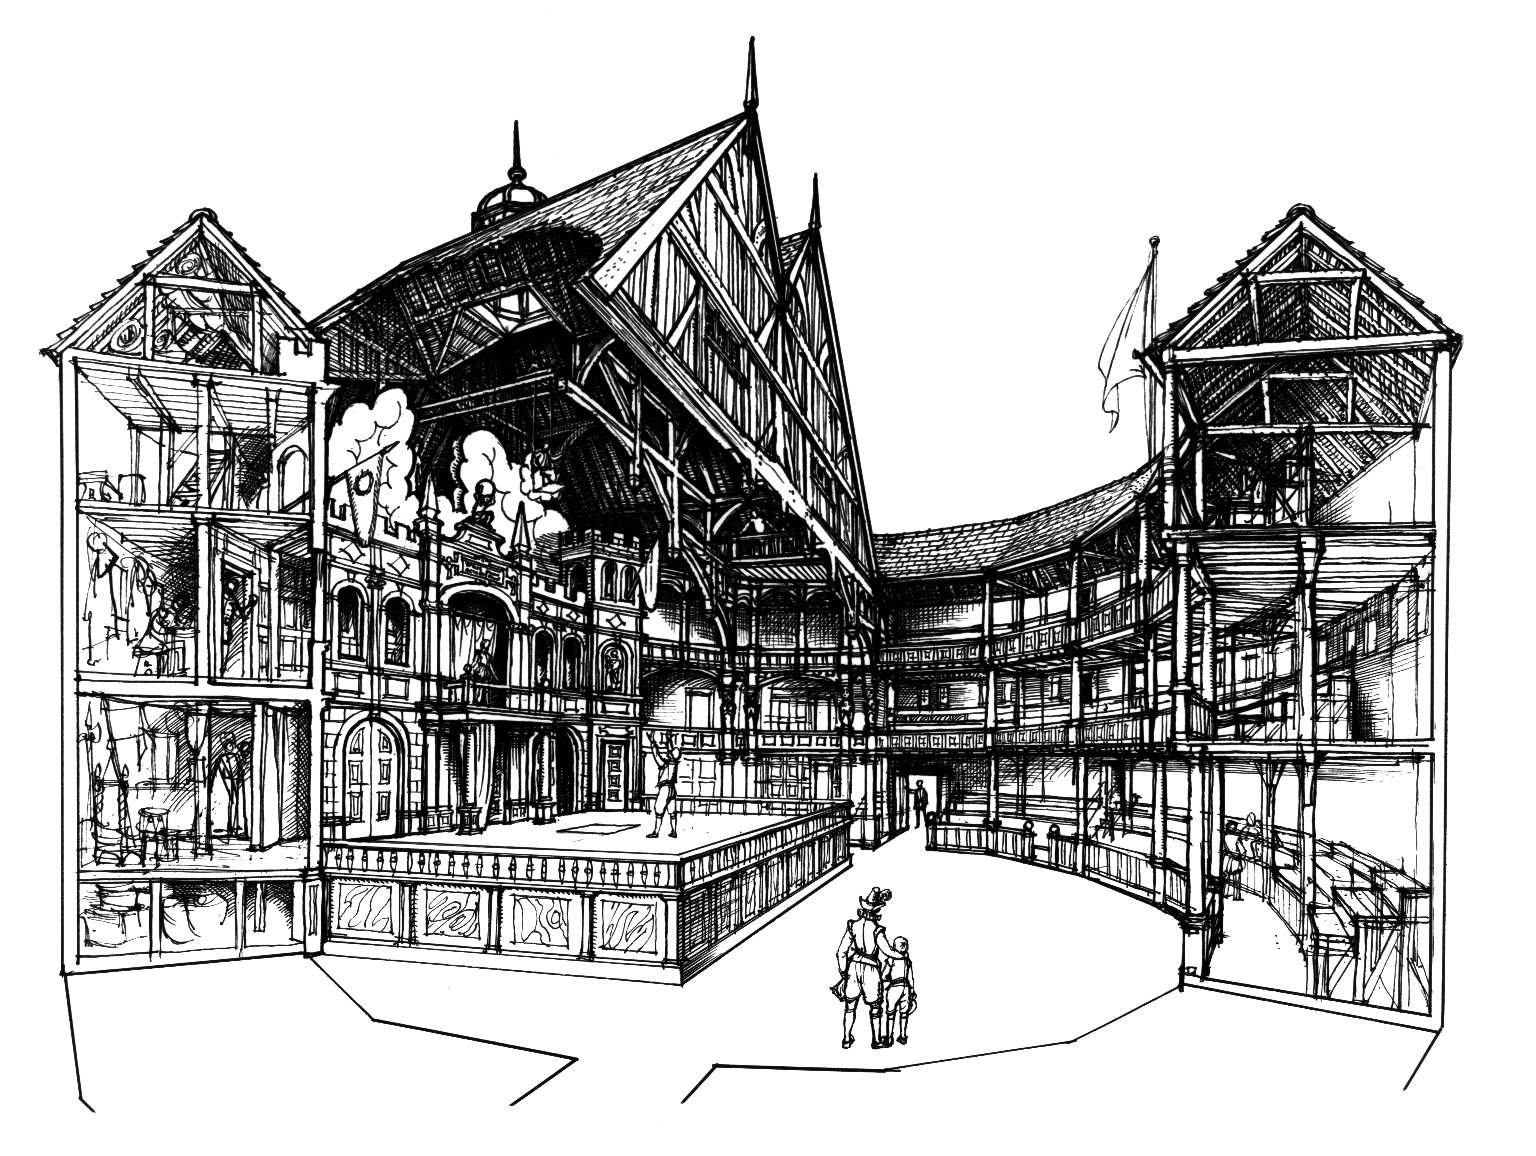 Conjectural, cut-away view of the interior of the Globe by Cyril Walter Hodges. Image courtesy of the Folger Digital Image Collection.